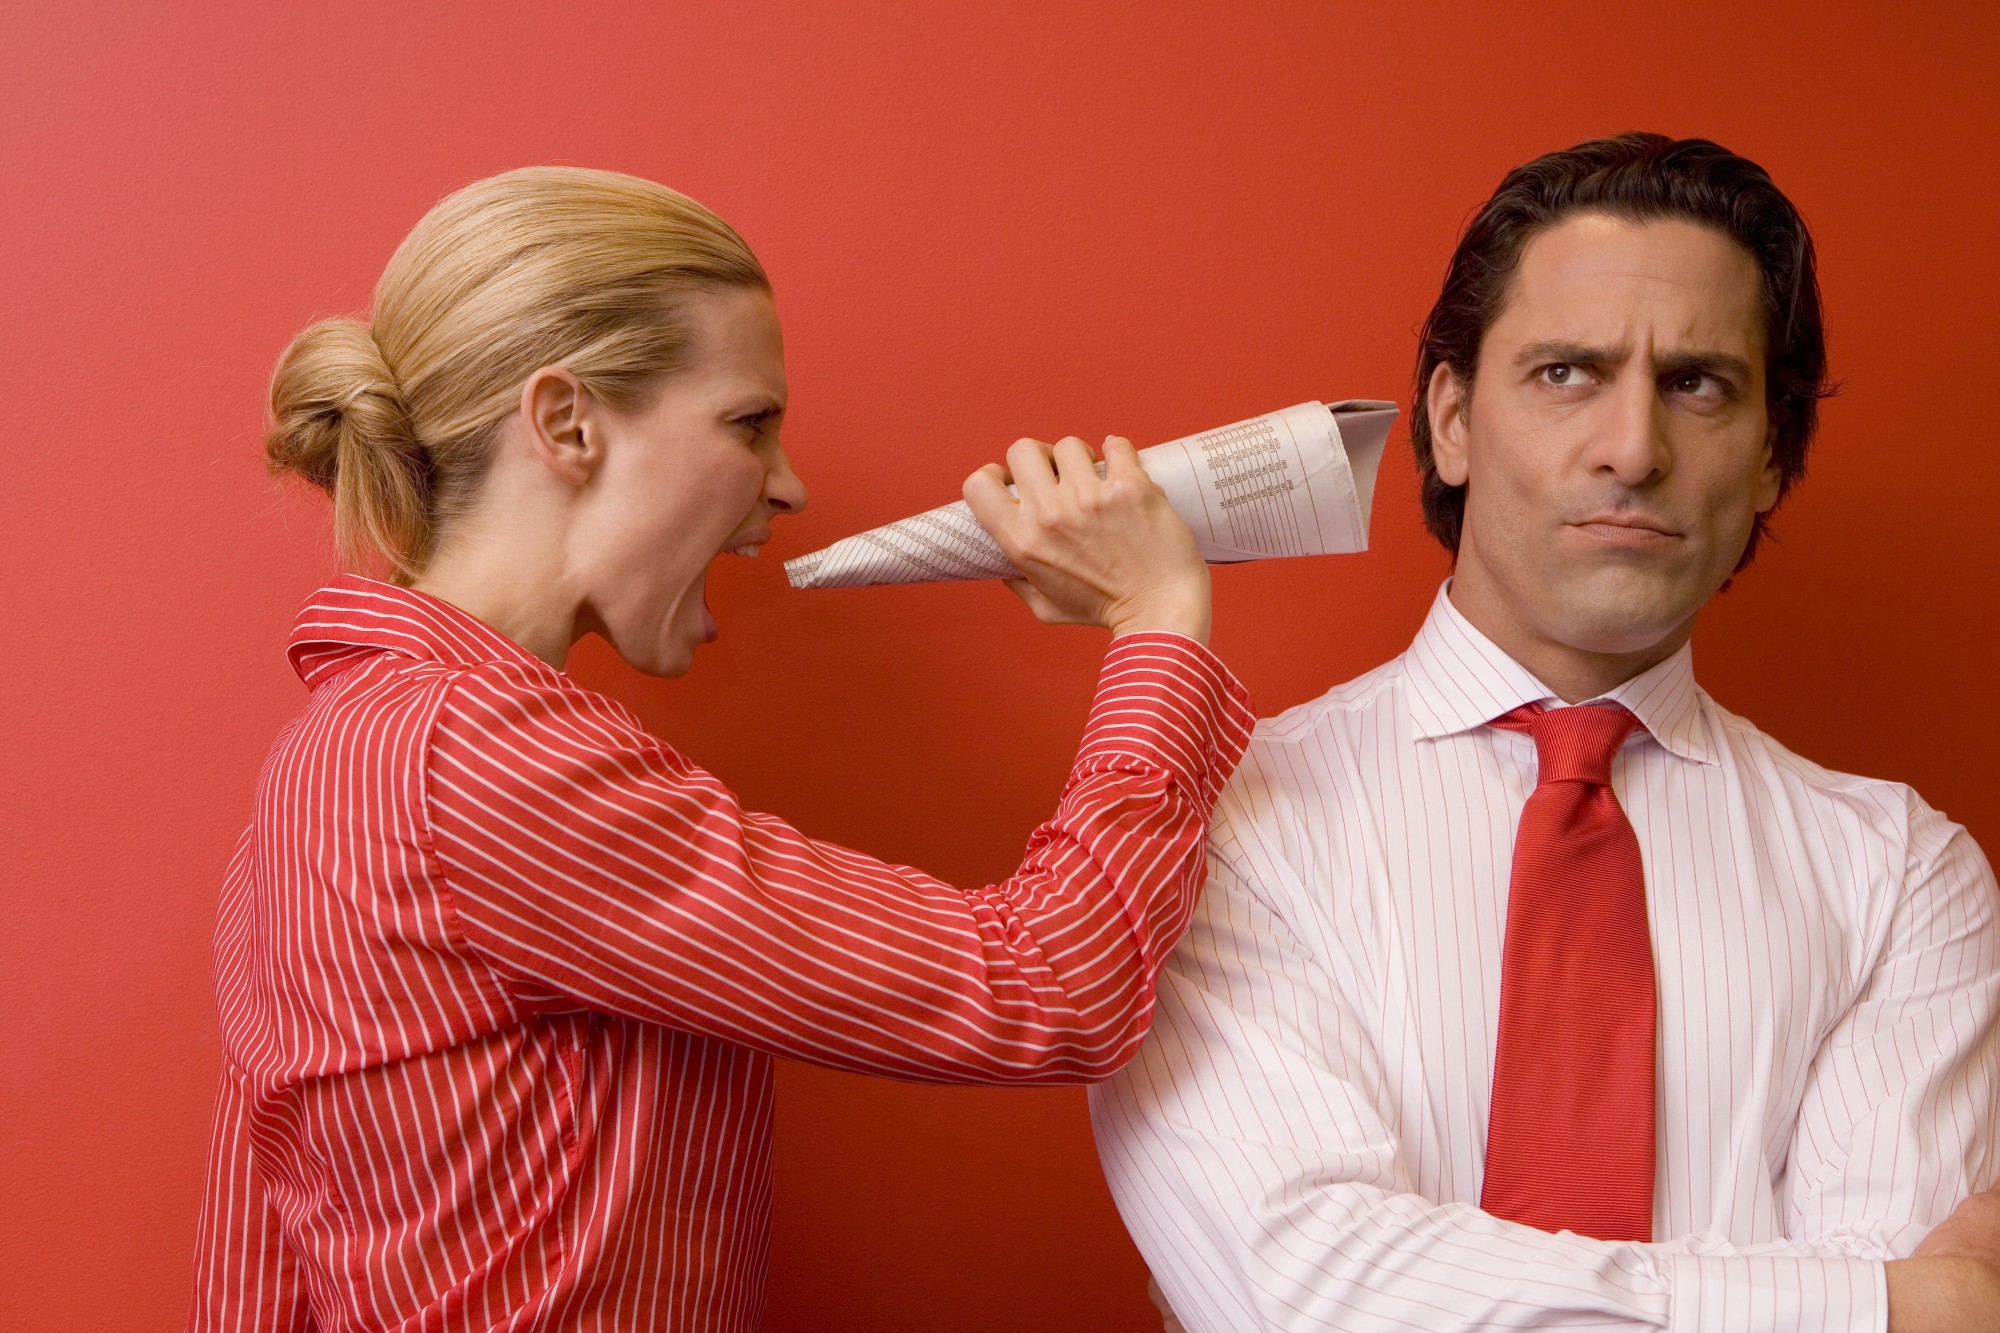 How to Deal with All of the Annoying People in Your Office